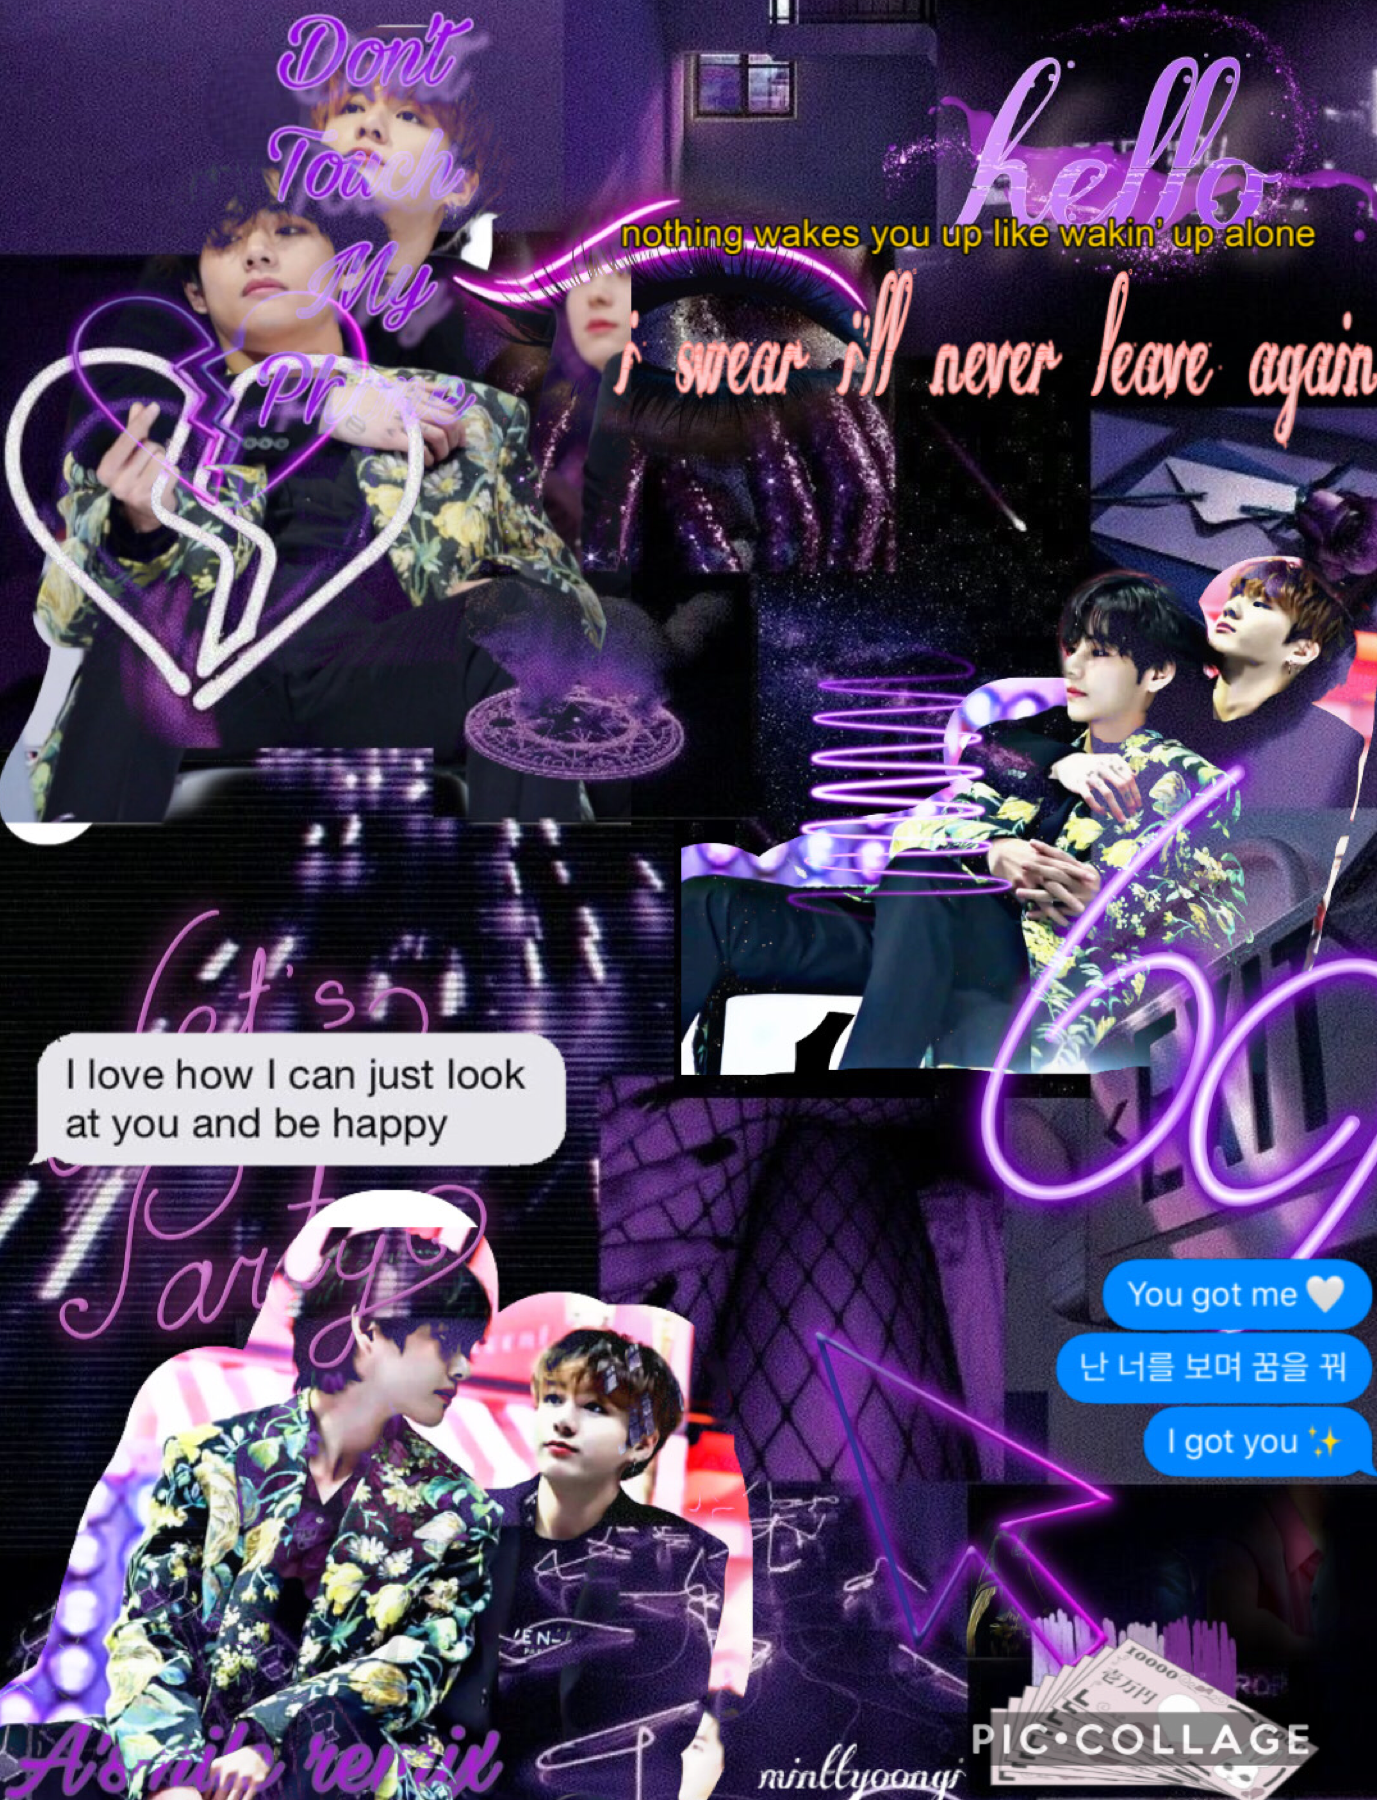 💖tap💖
i have a picsart account and all my work is on there as well and i try to post on both apps. taekook makes me sad lol byeee